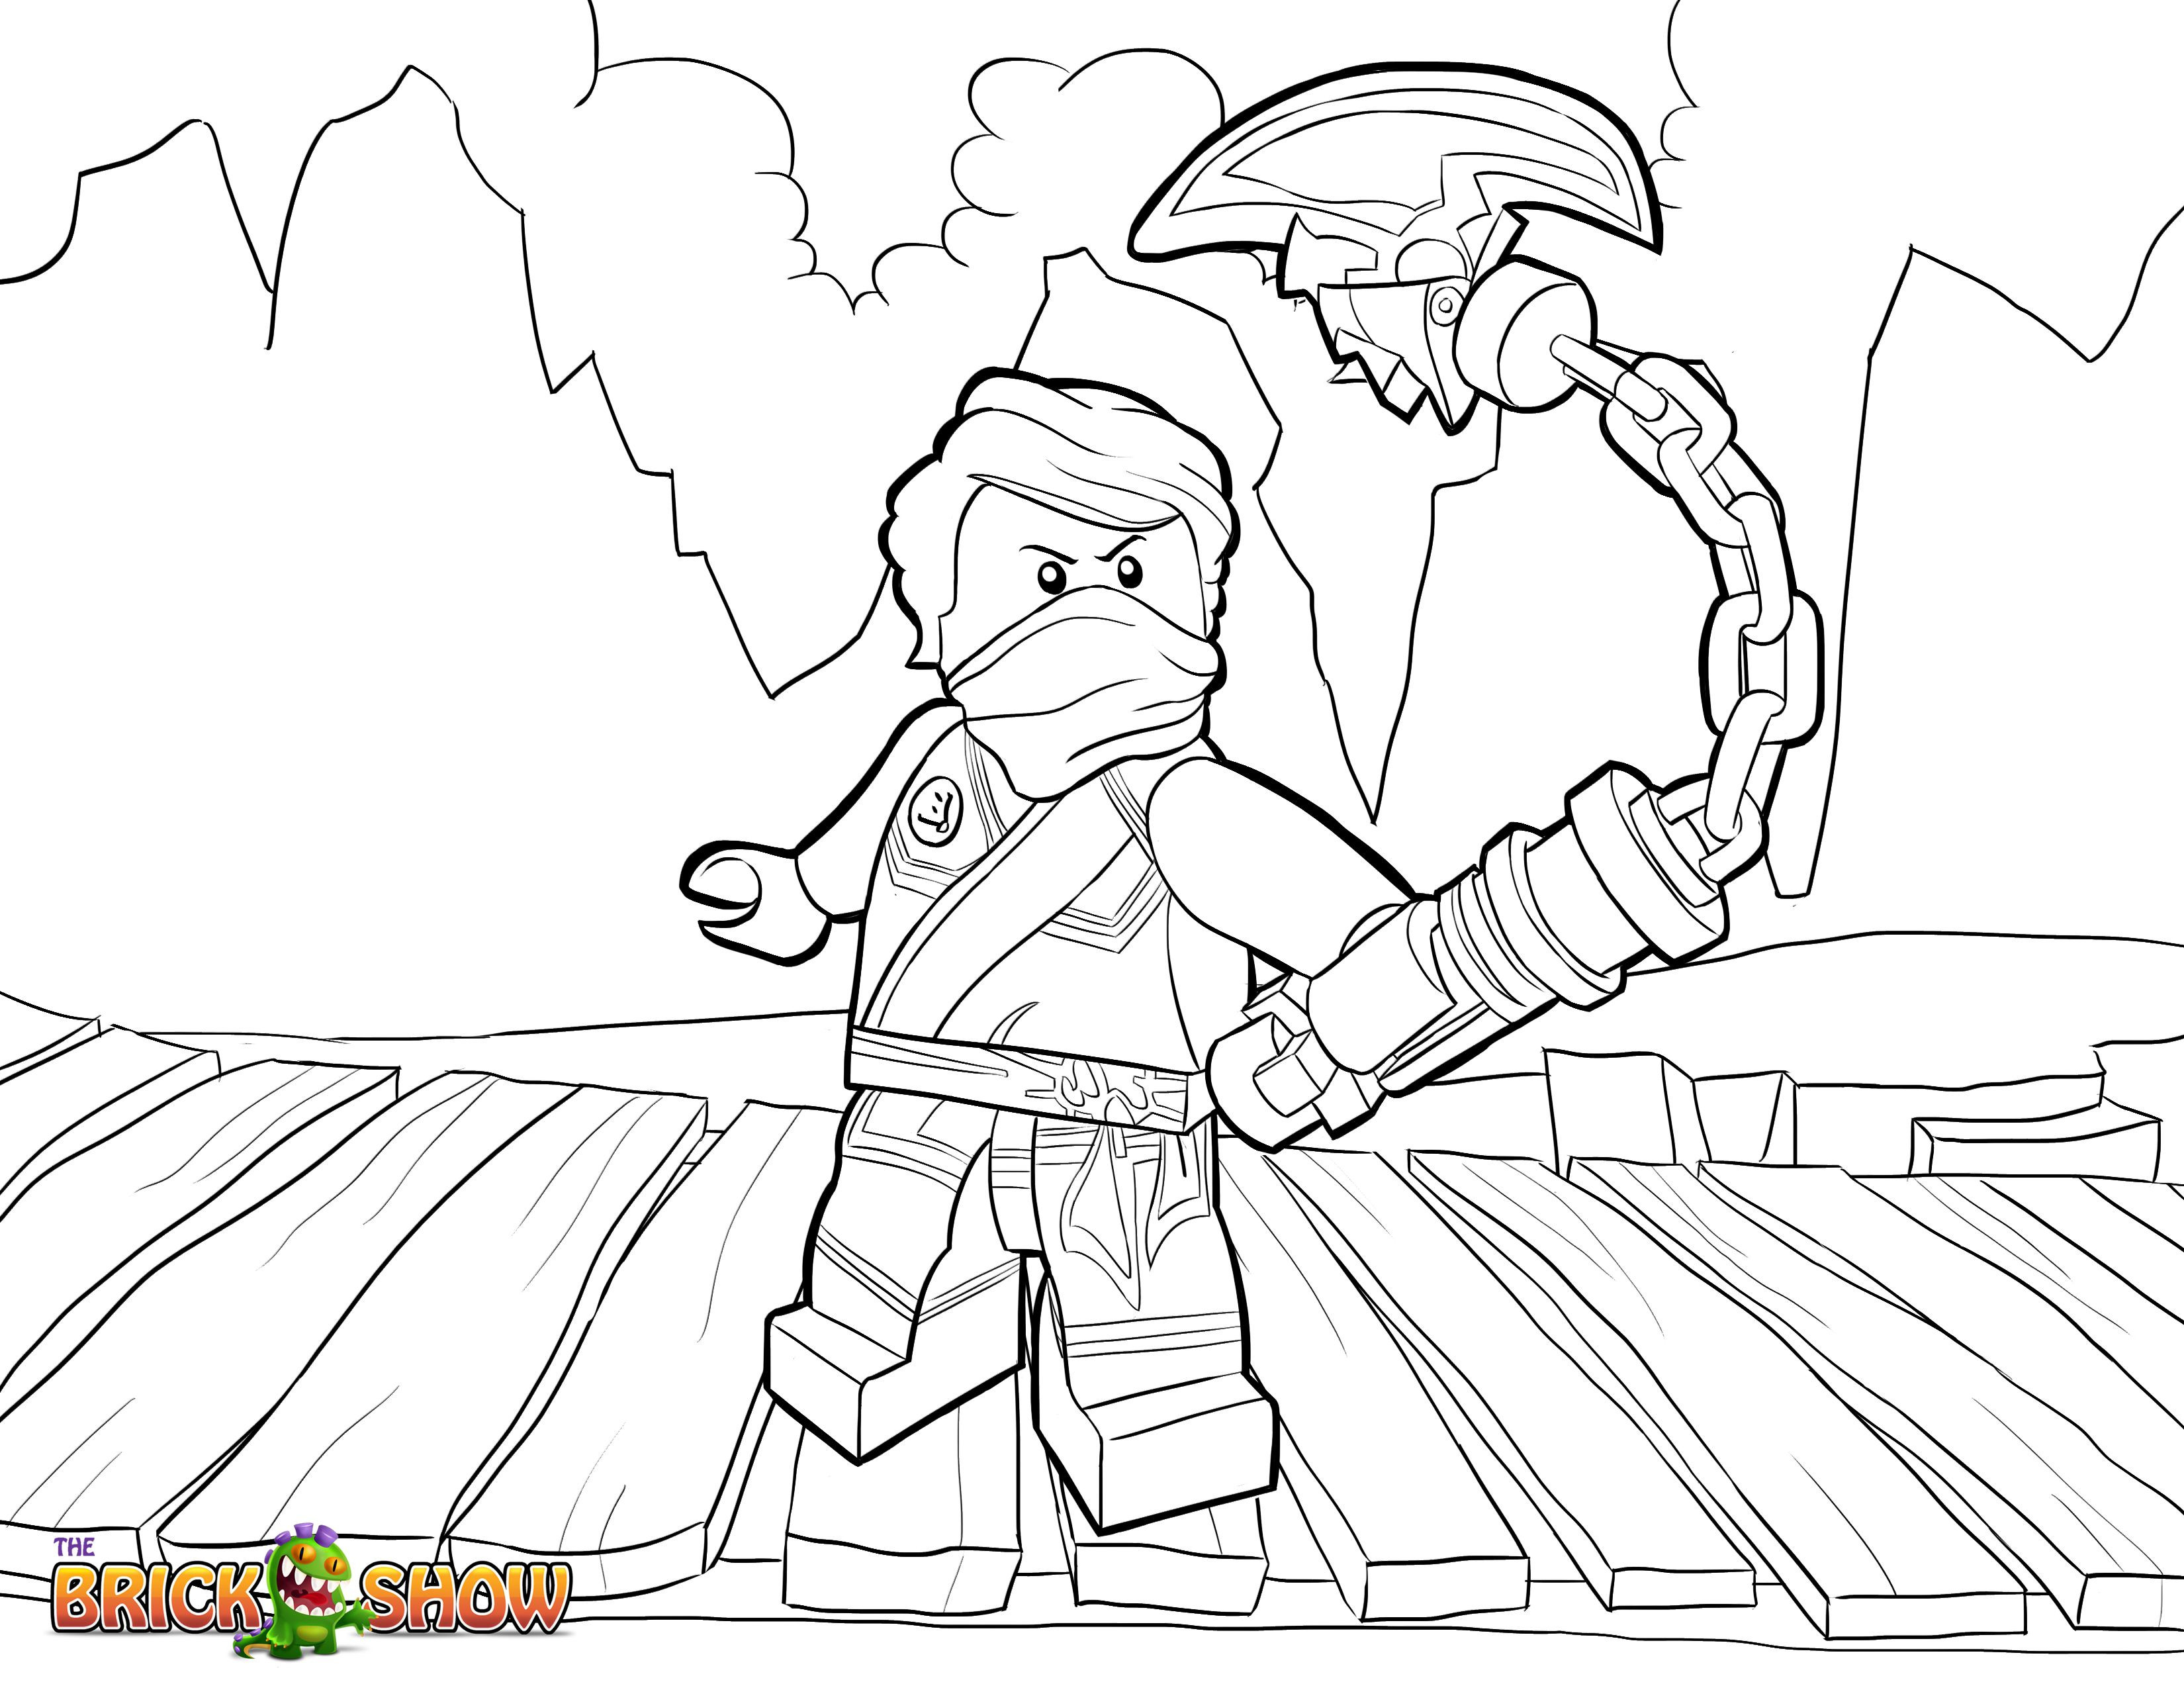 Jay Ninjago Coloring Pages Coloring Books Spirit Riding Free Coloring Pages Printable Lego